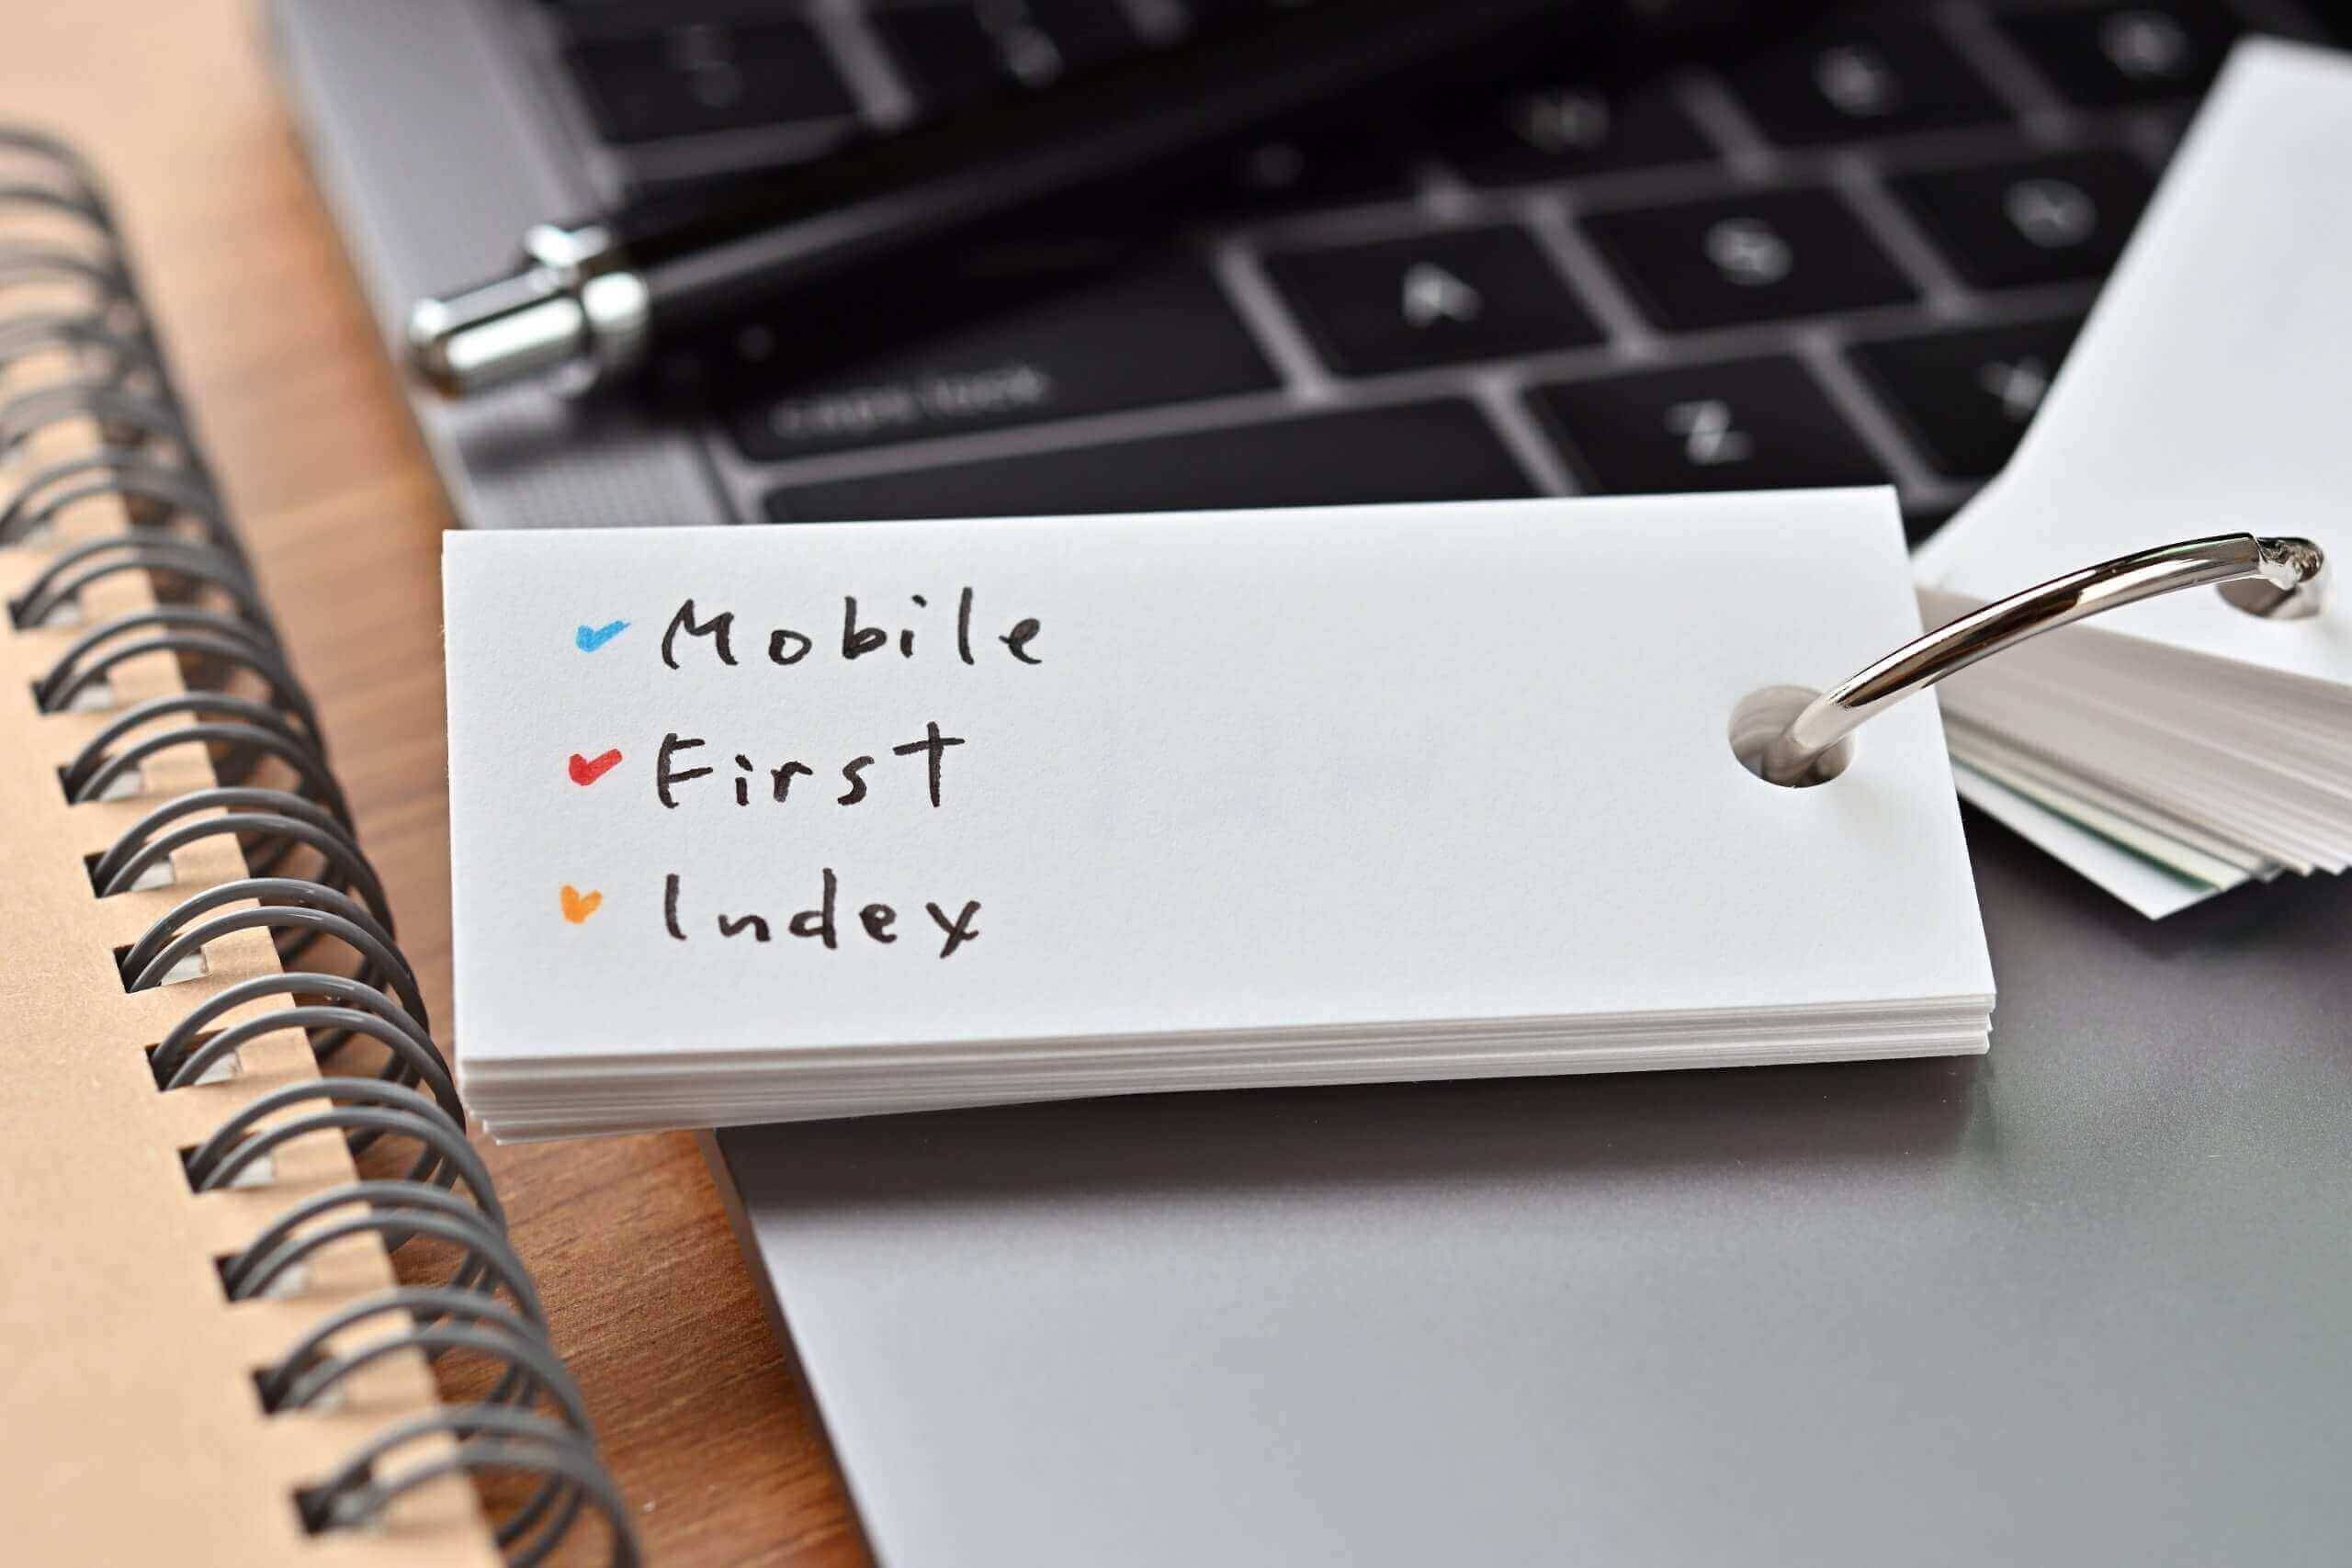 Mobile First Index